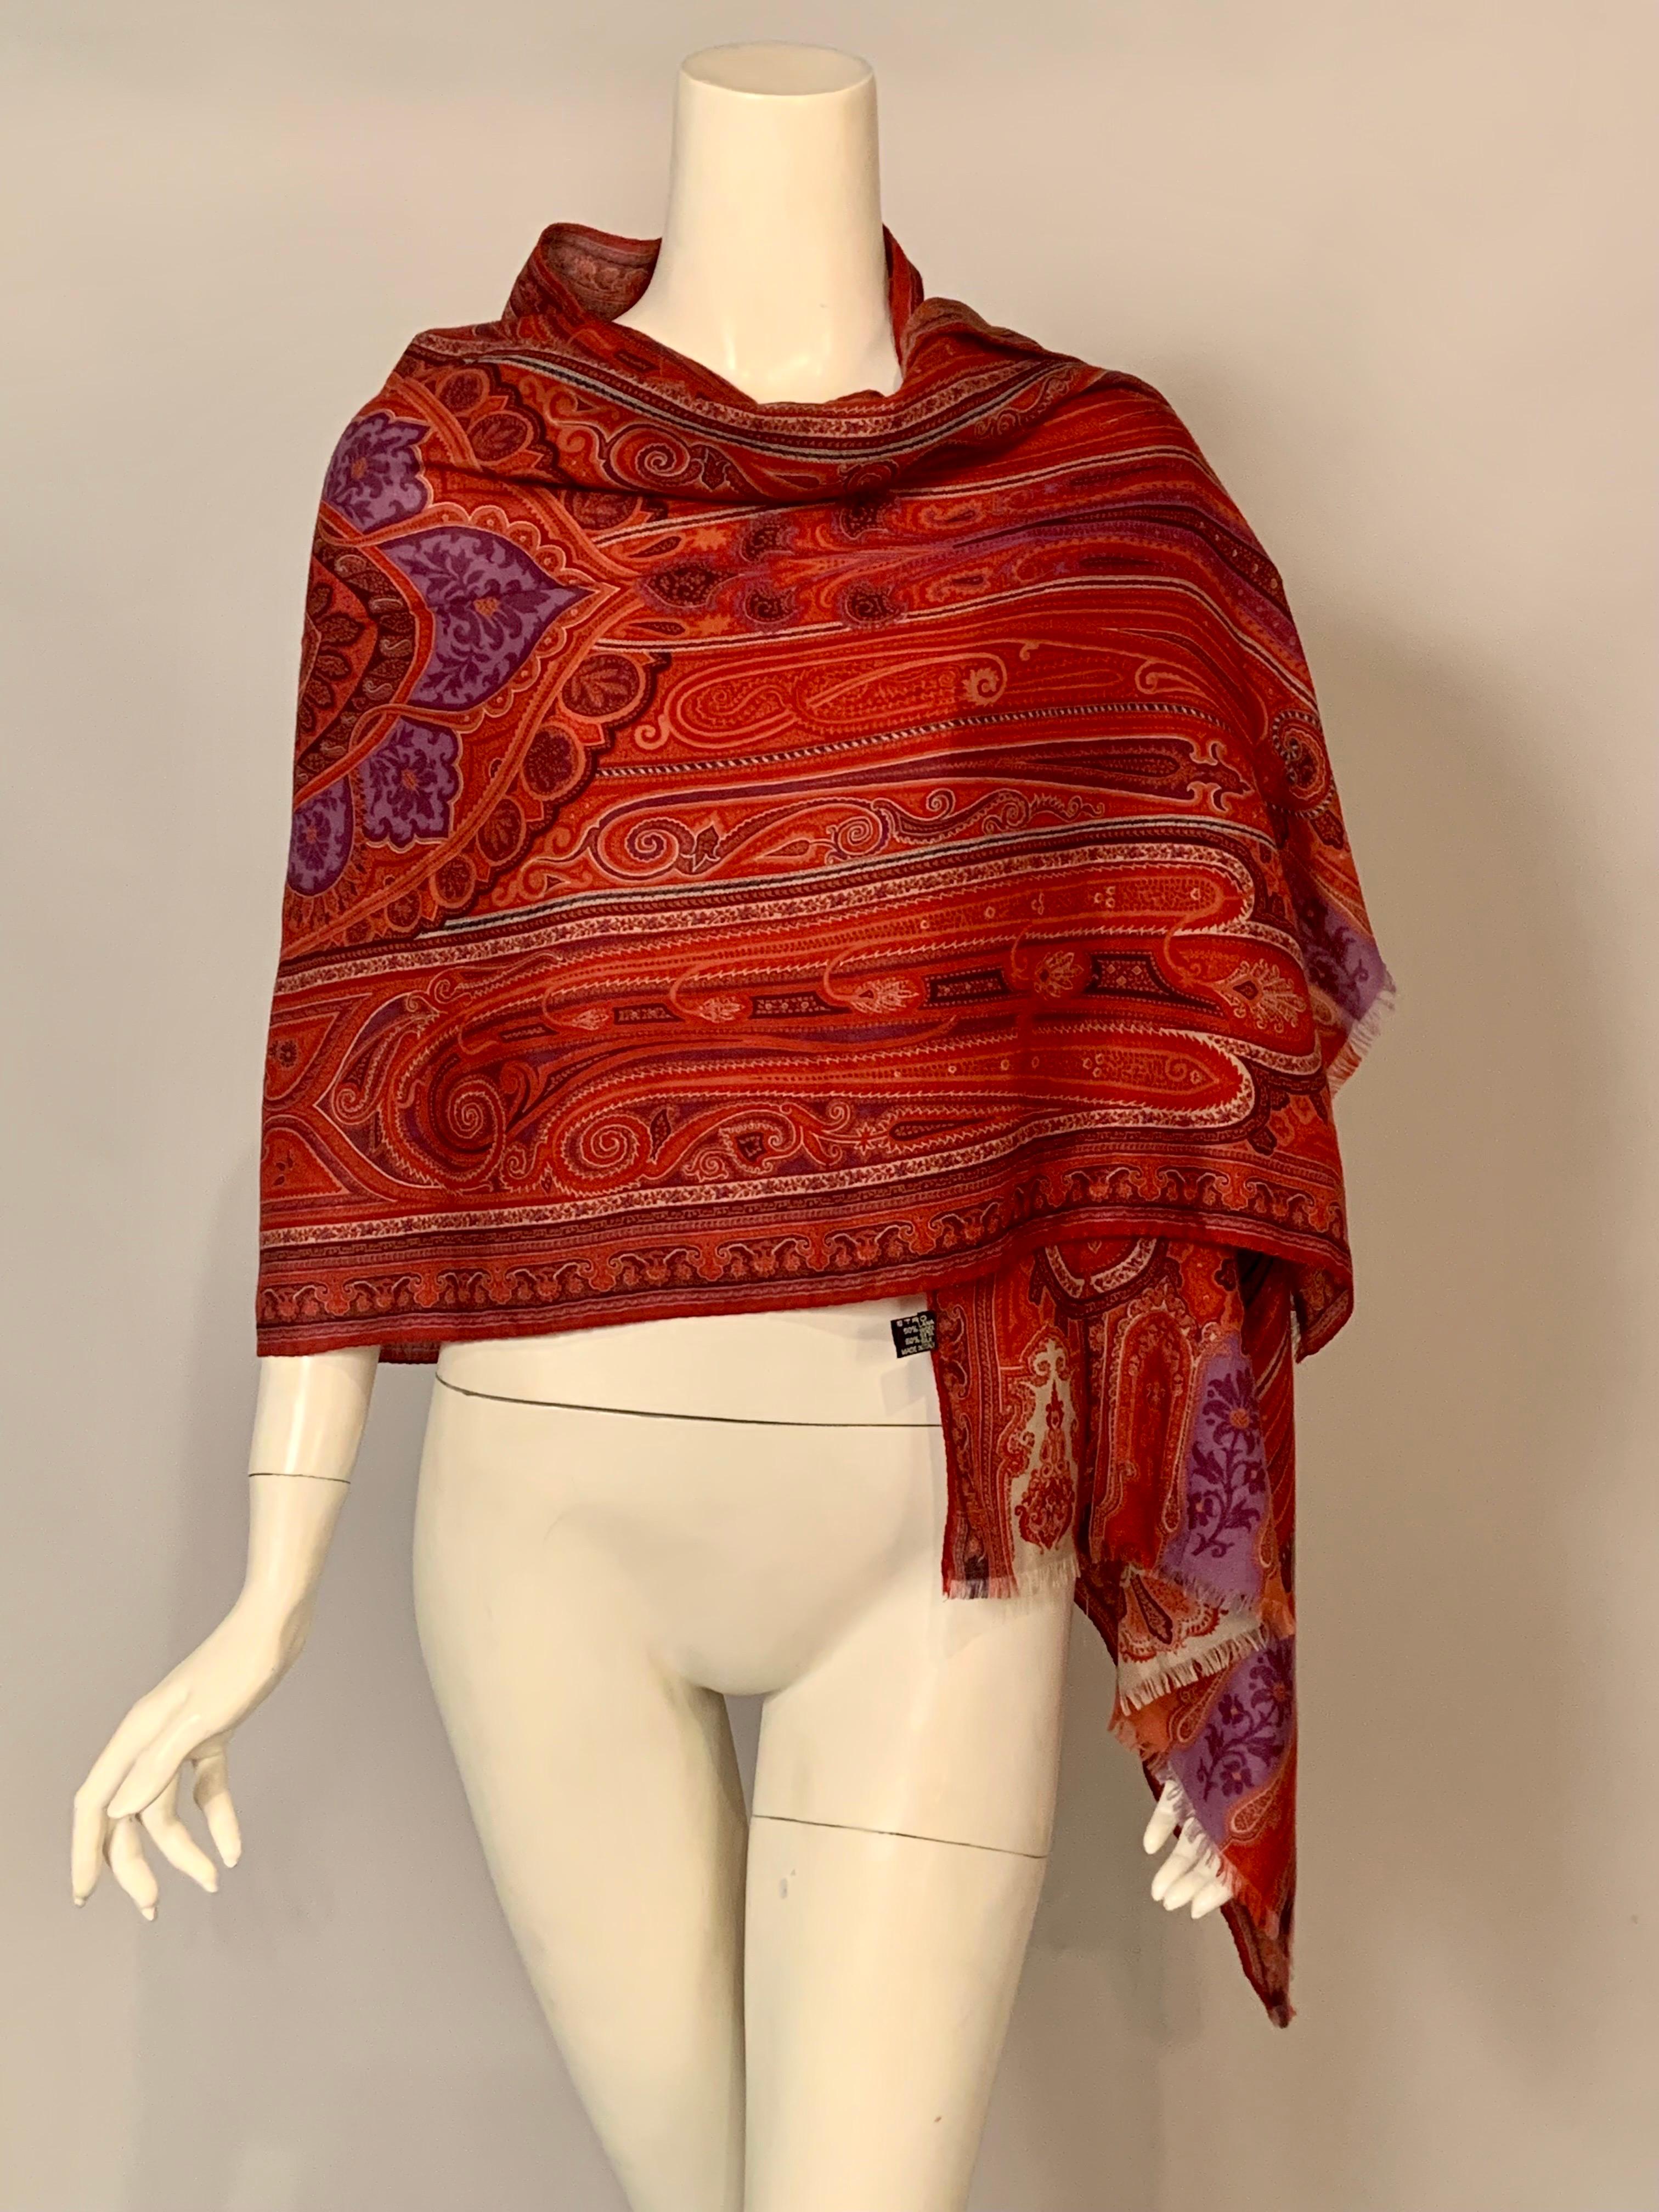 A very  colorful paisley pattern  scarf from Etro, Milan is made from wool and silk.  The scarf is predominately shades of red with cream, blue and black.  The center of the scarf has designs worked in lavender and purple creating a more